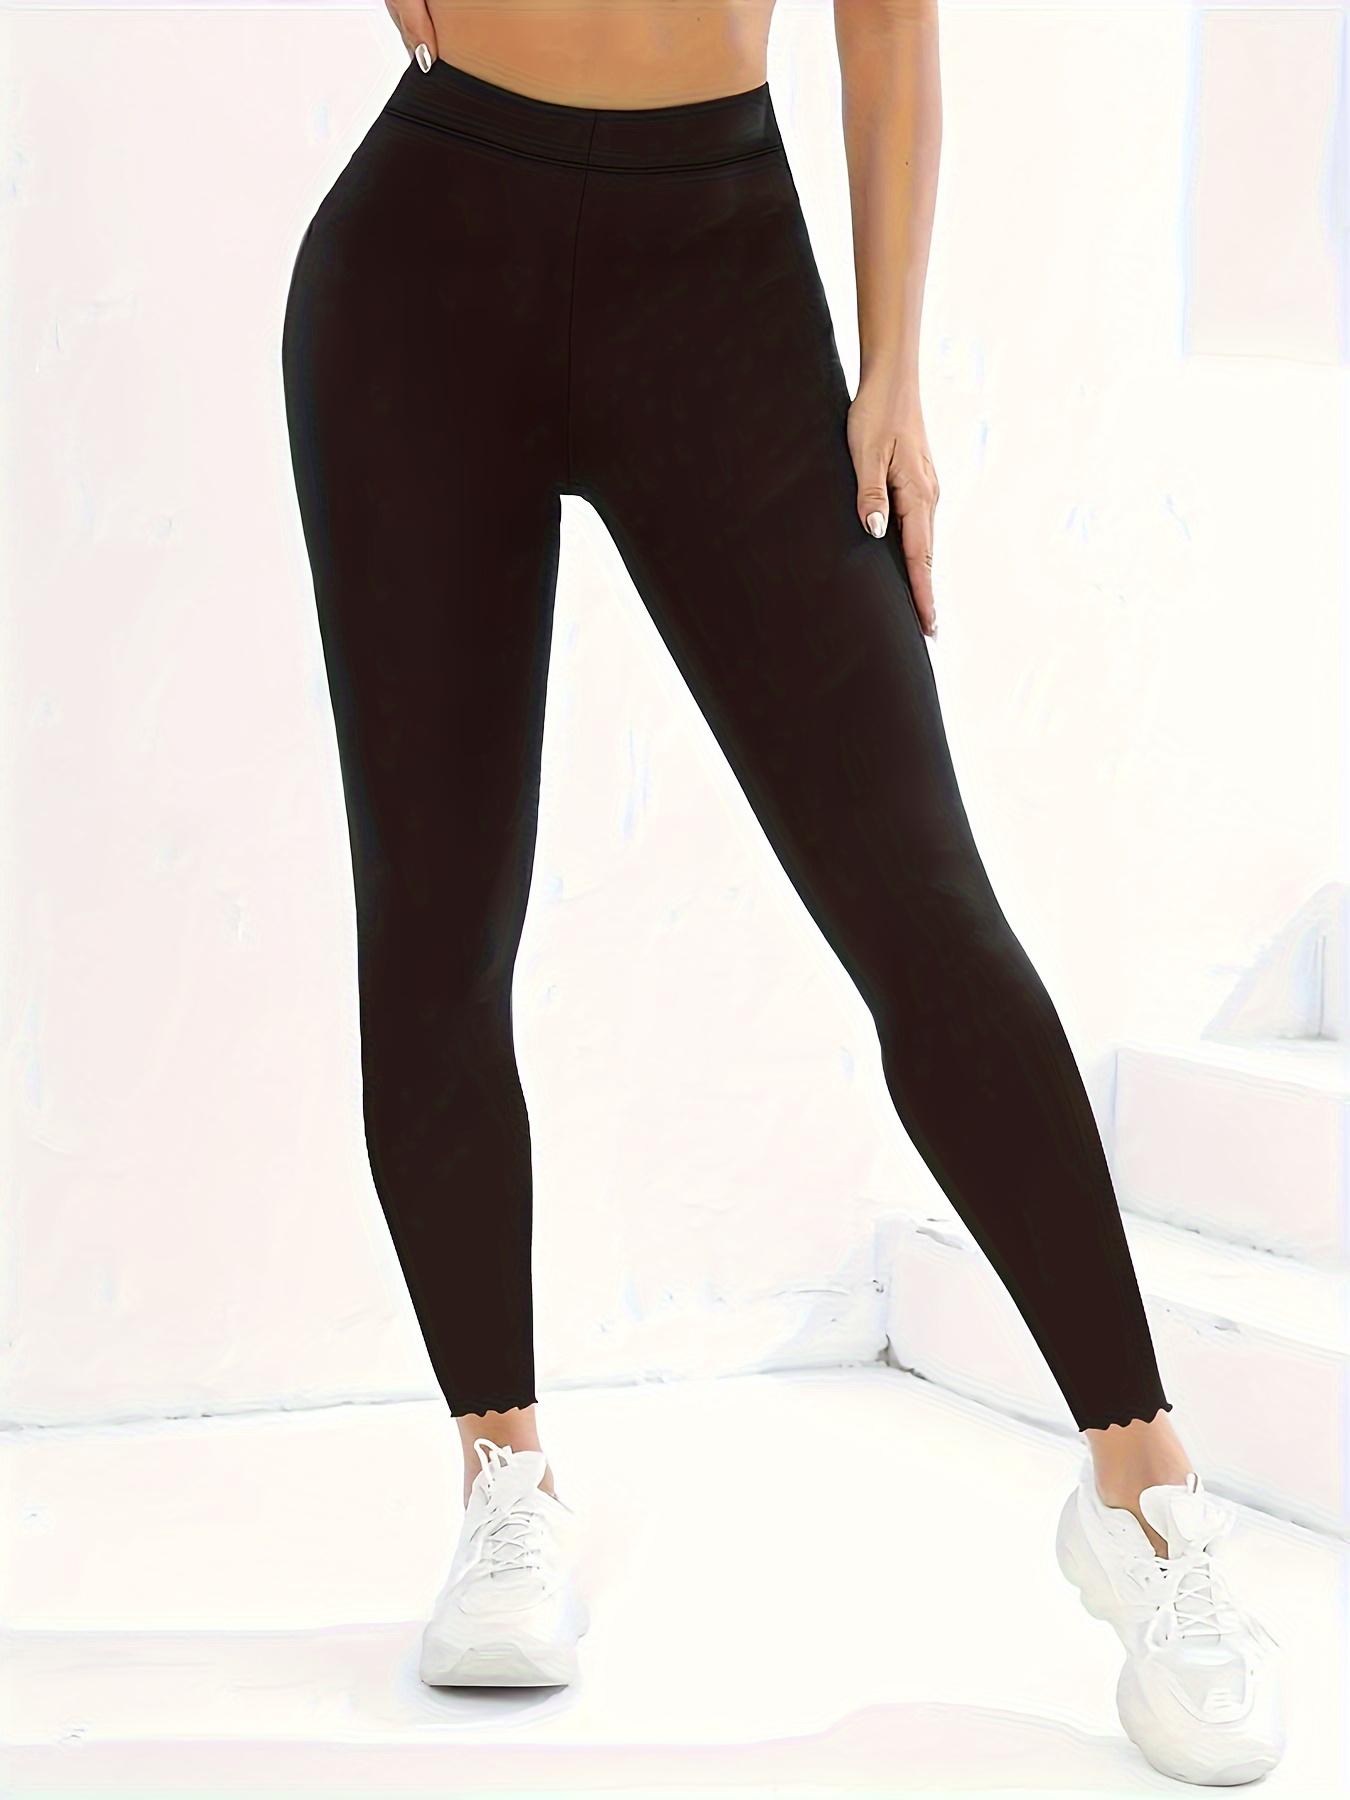 SHEIN Yoga Basic Solid Color High Waisted Sports Leggings workout